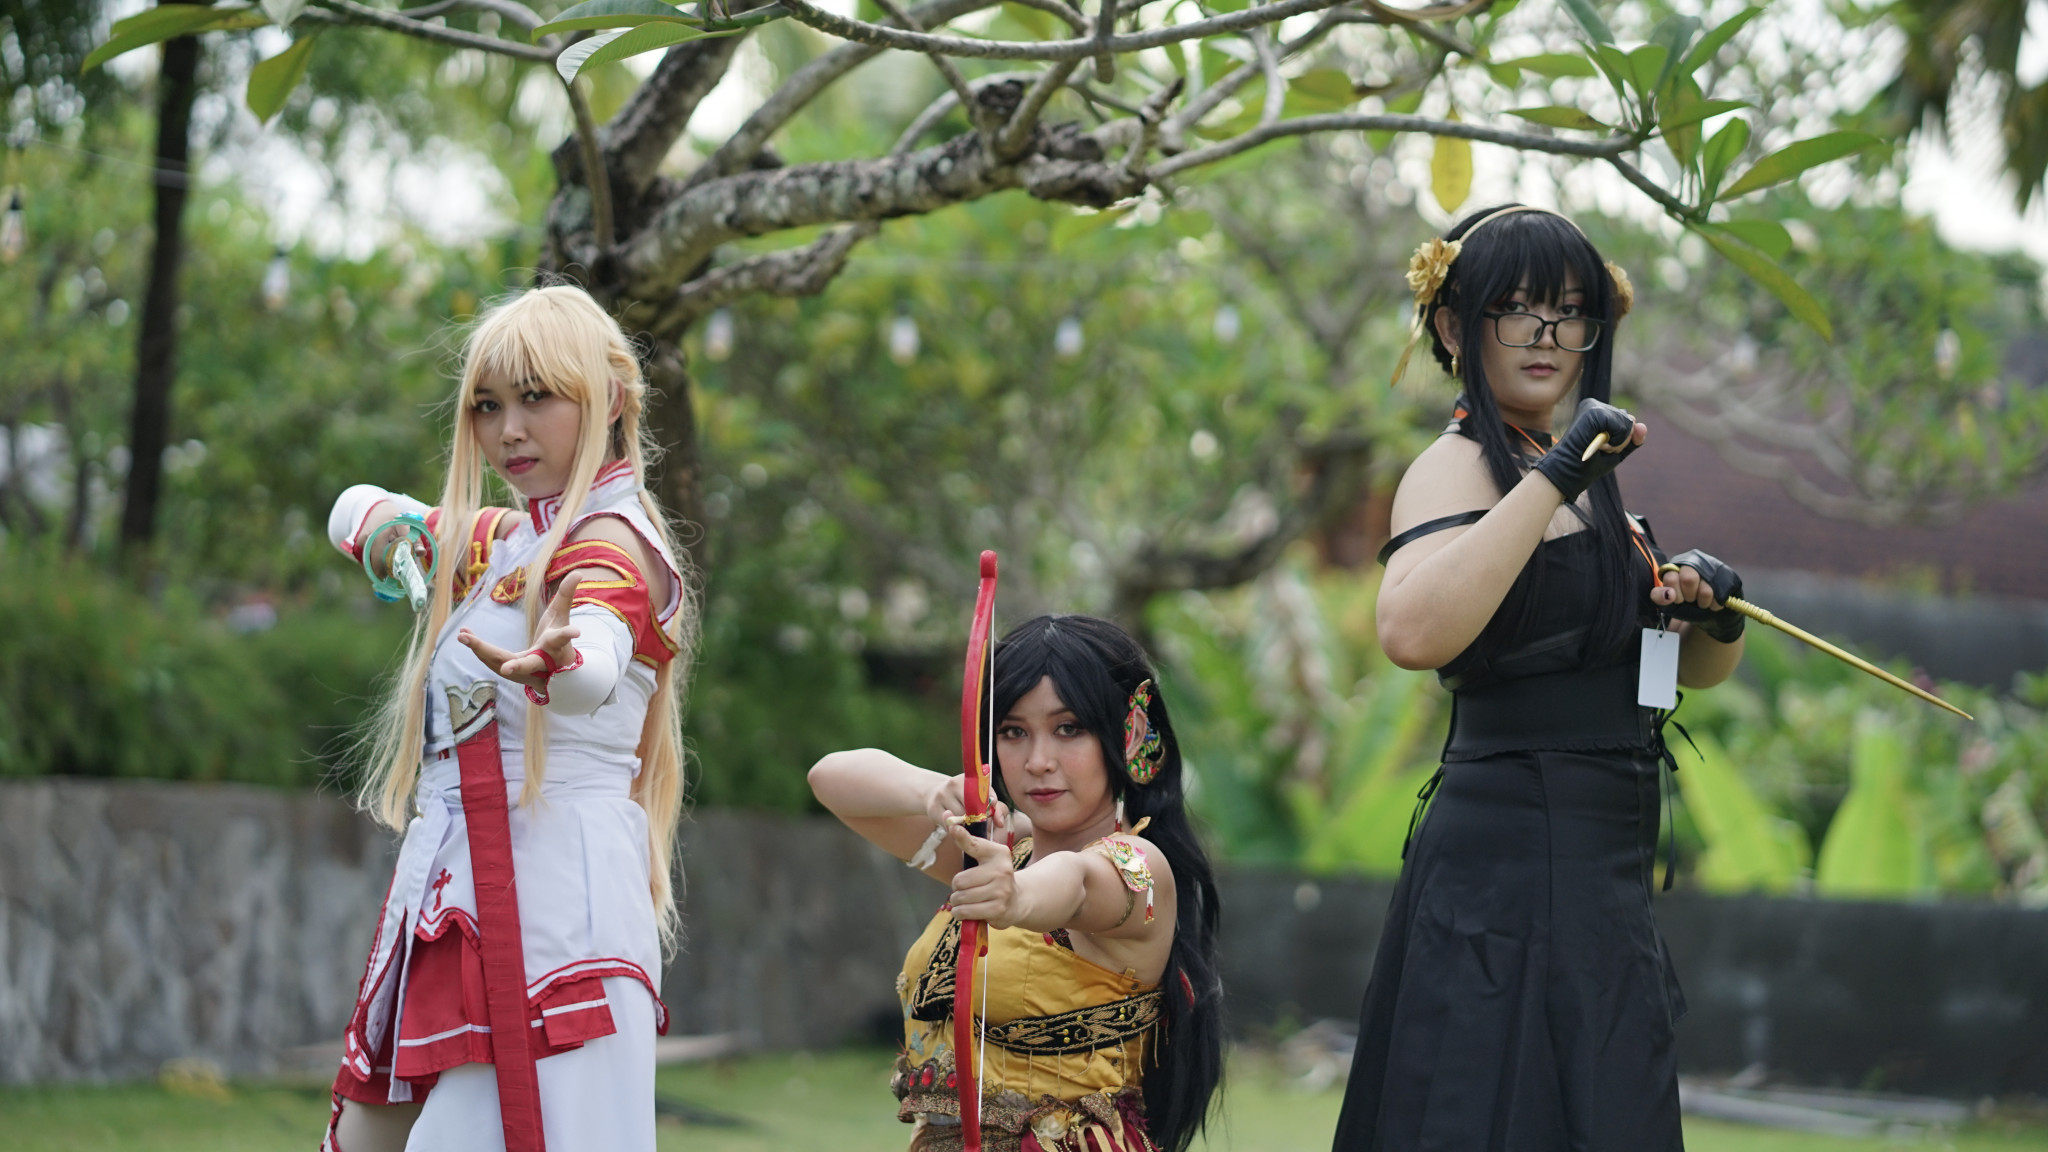 Cosplay is encouraged at the IESF World Championships ©IESF